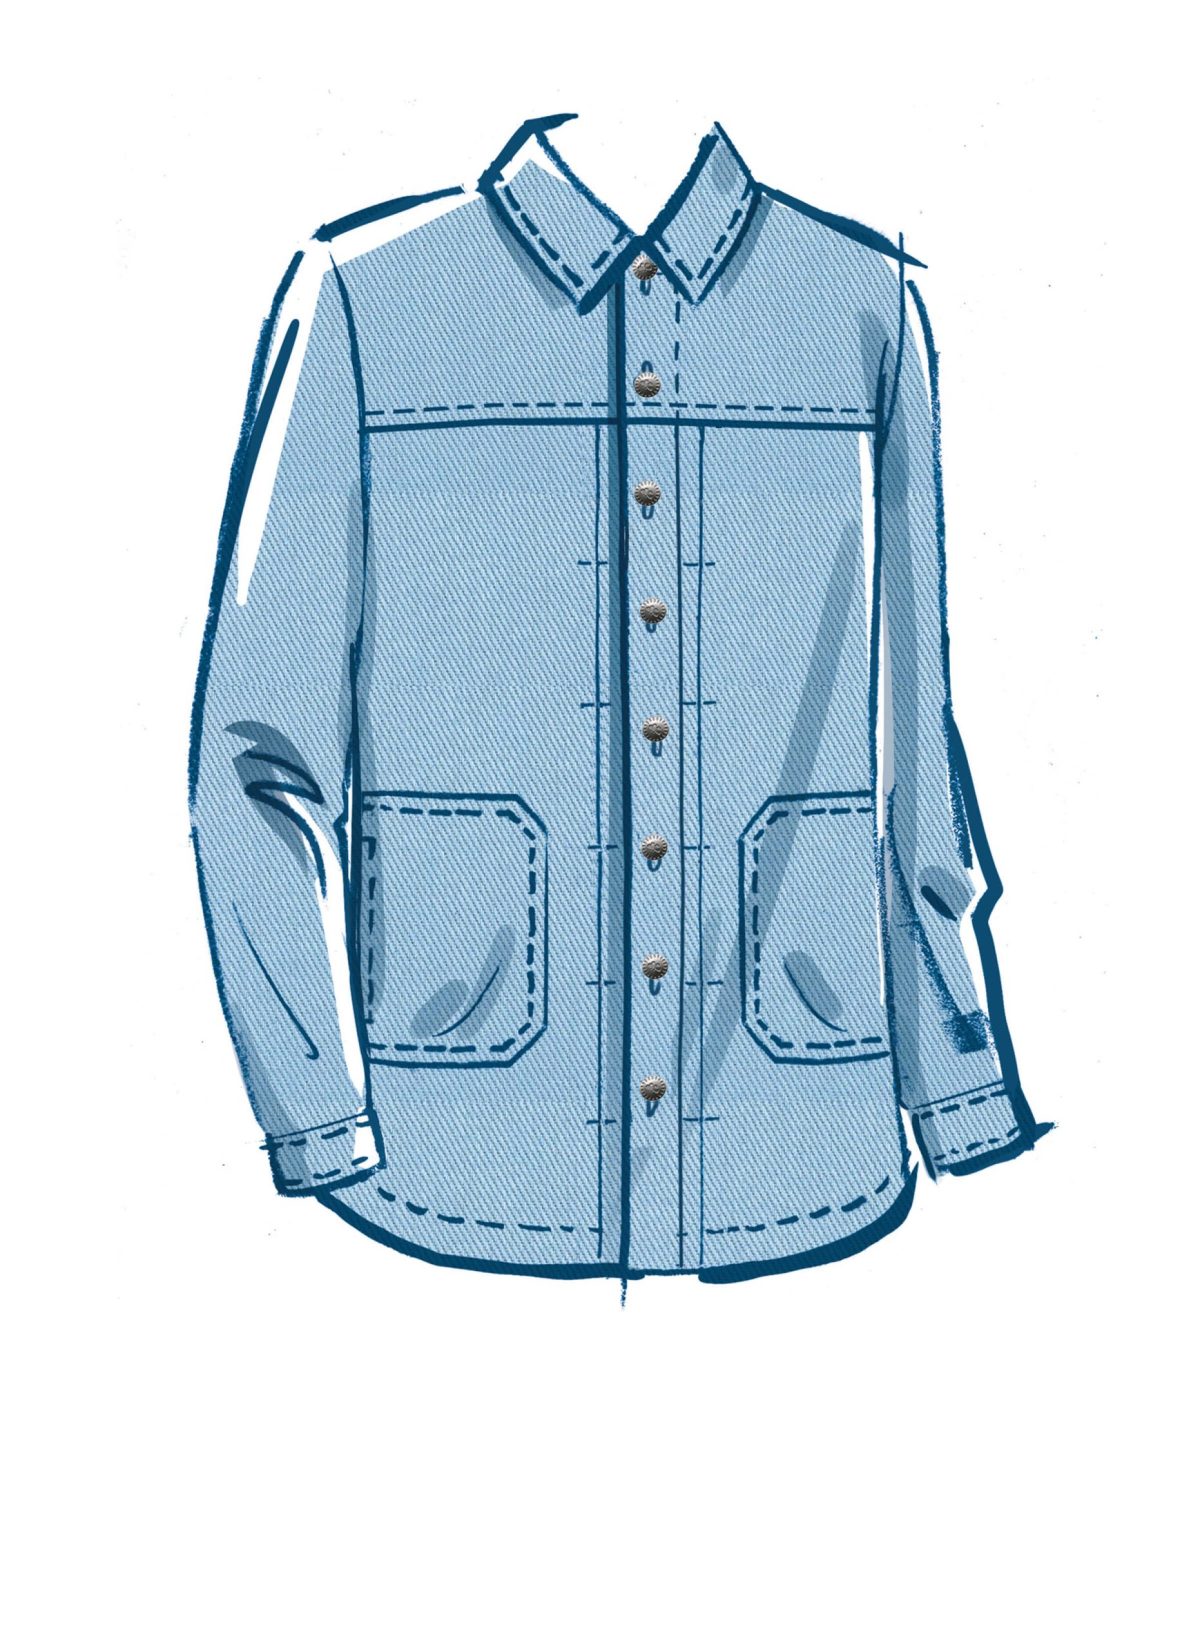 McCall's Sewing Pattern M8352 Men's Jacket